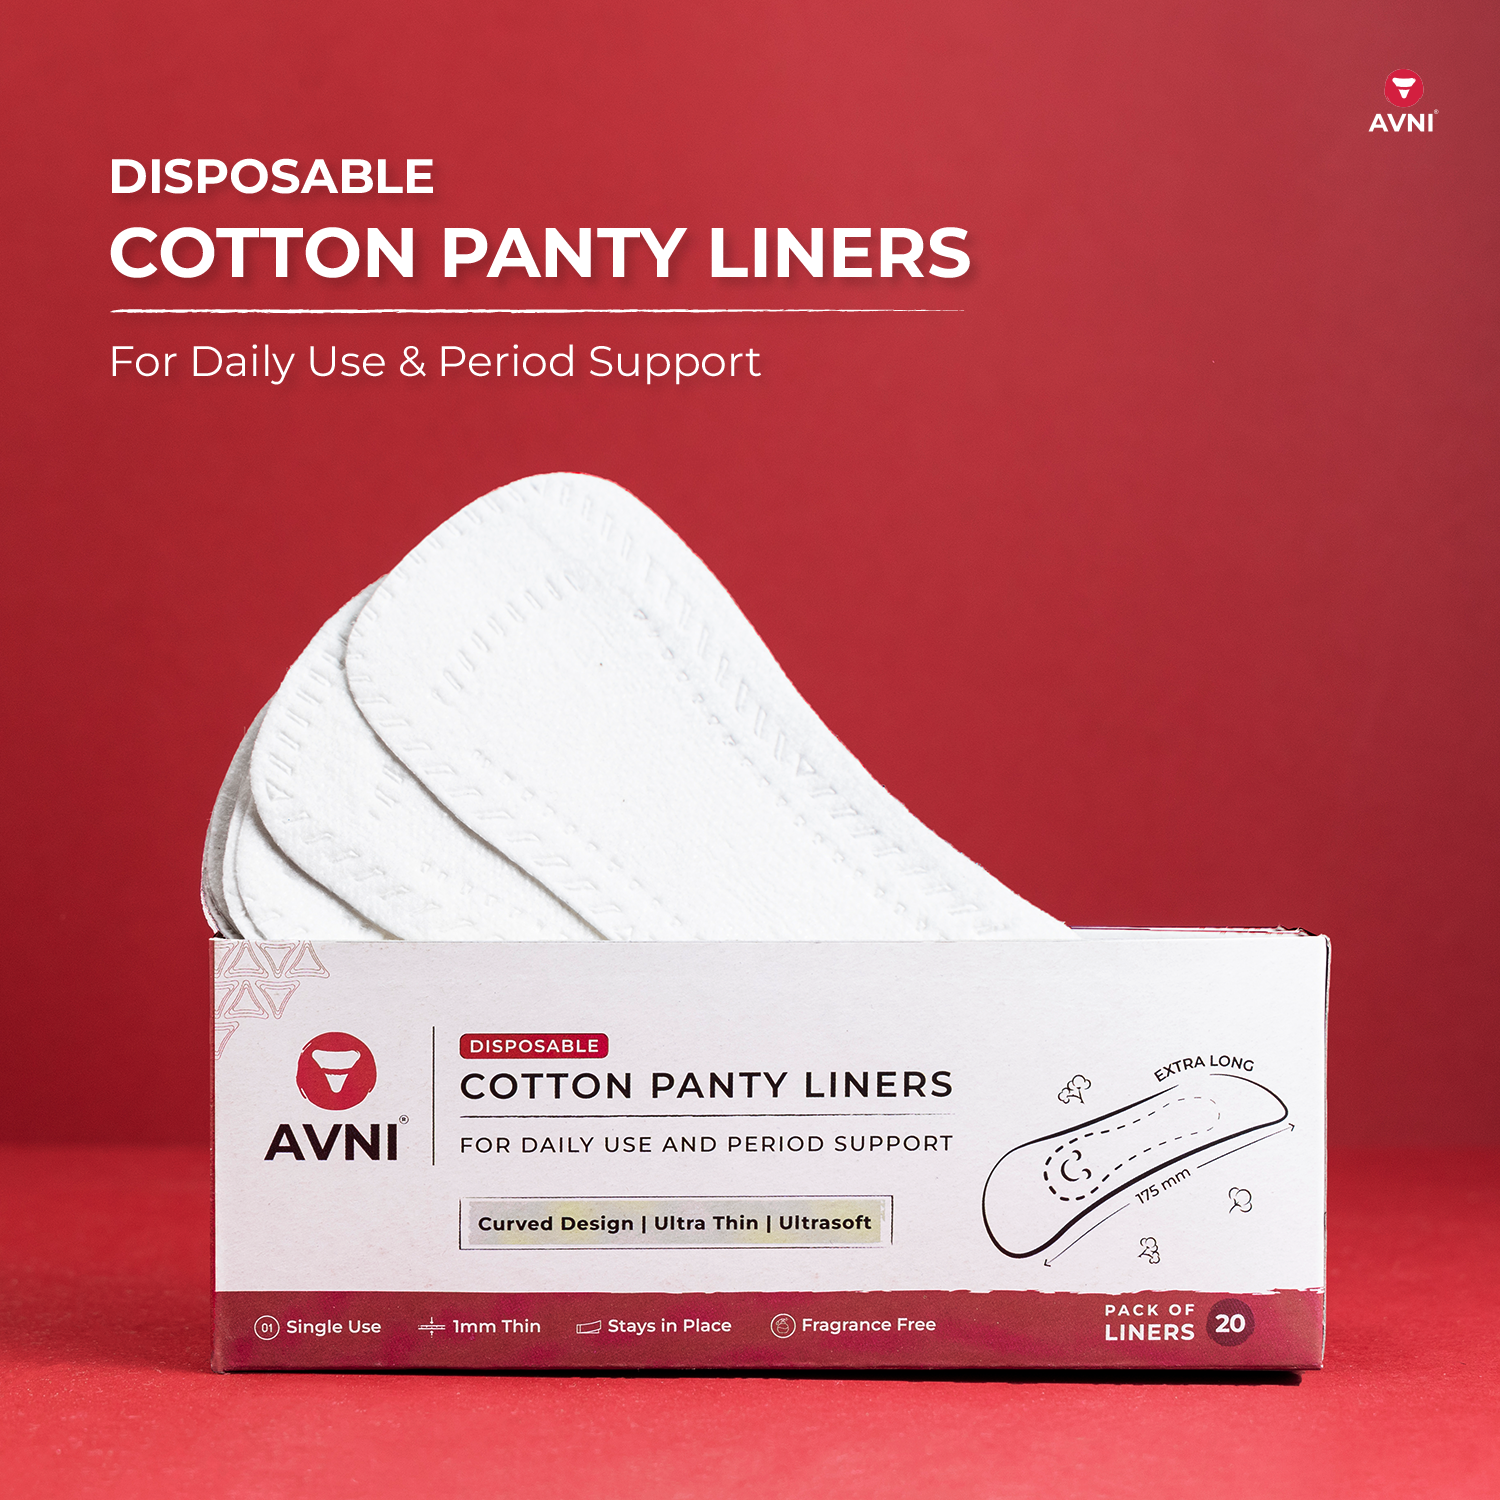 Disposable Cotton Panty Liners